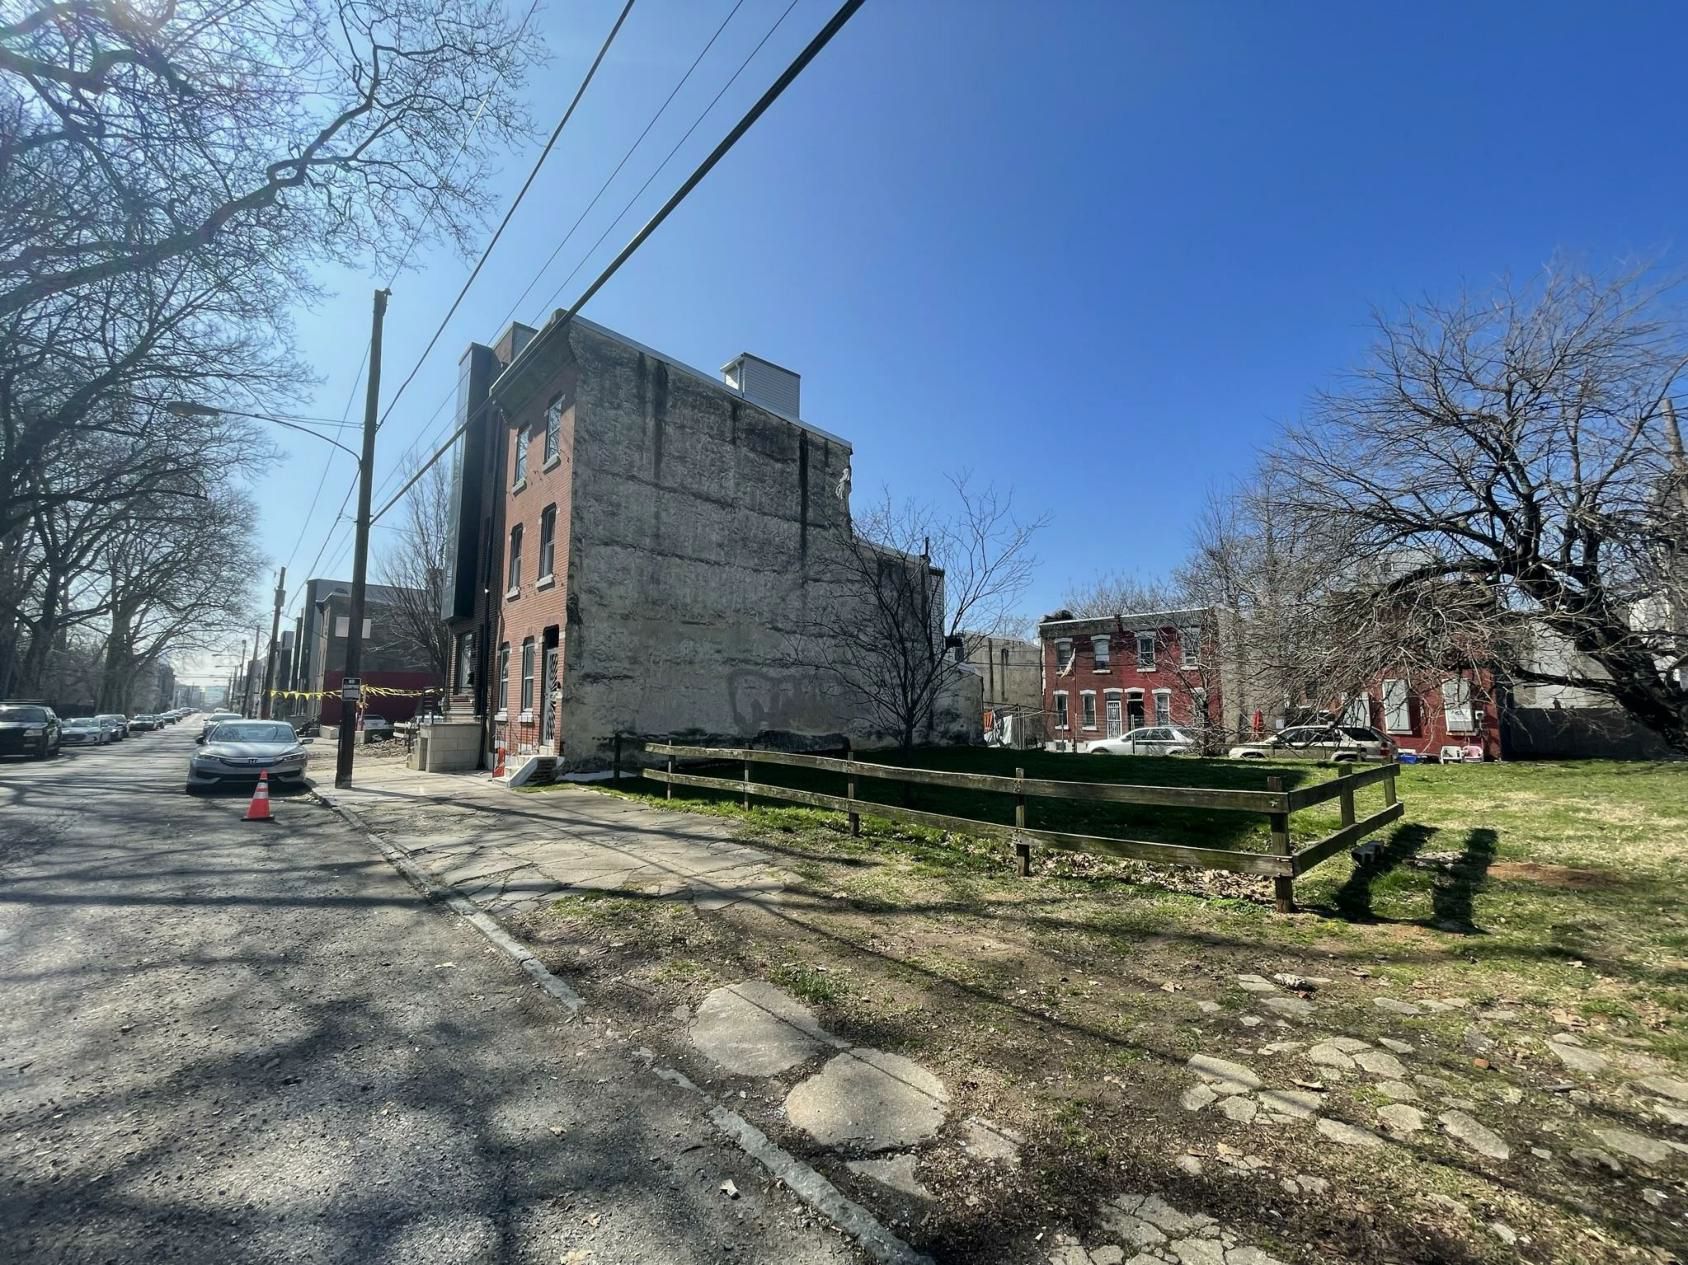 1444 North 27th Street. Site conditions prior to redevelopment. Looking southwest. Credit: Moto Designshop via the City of Philadelphia